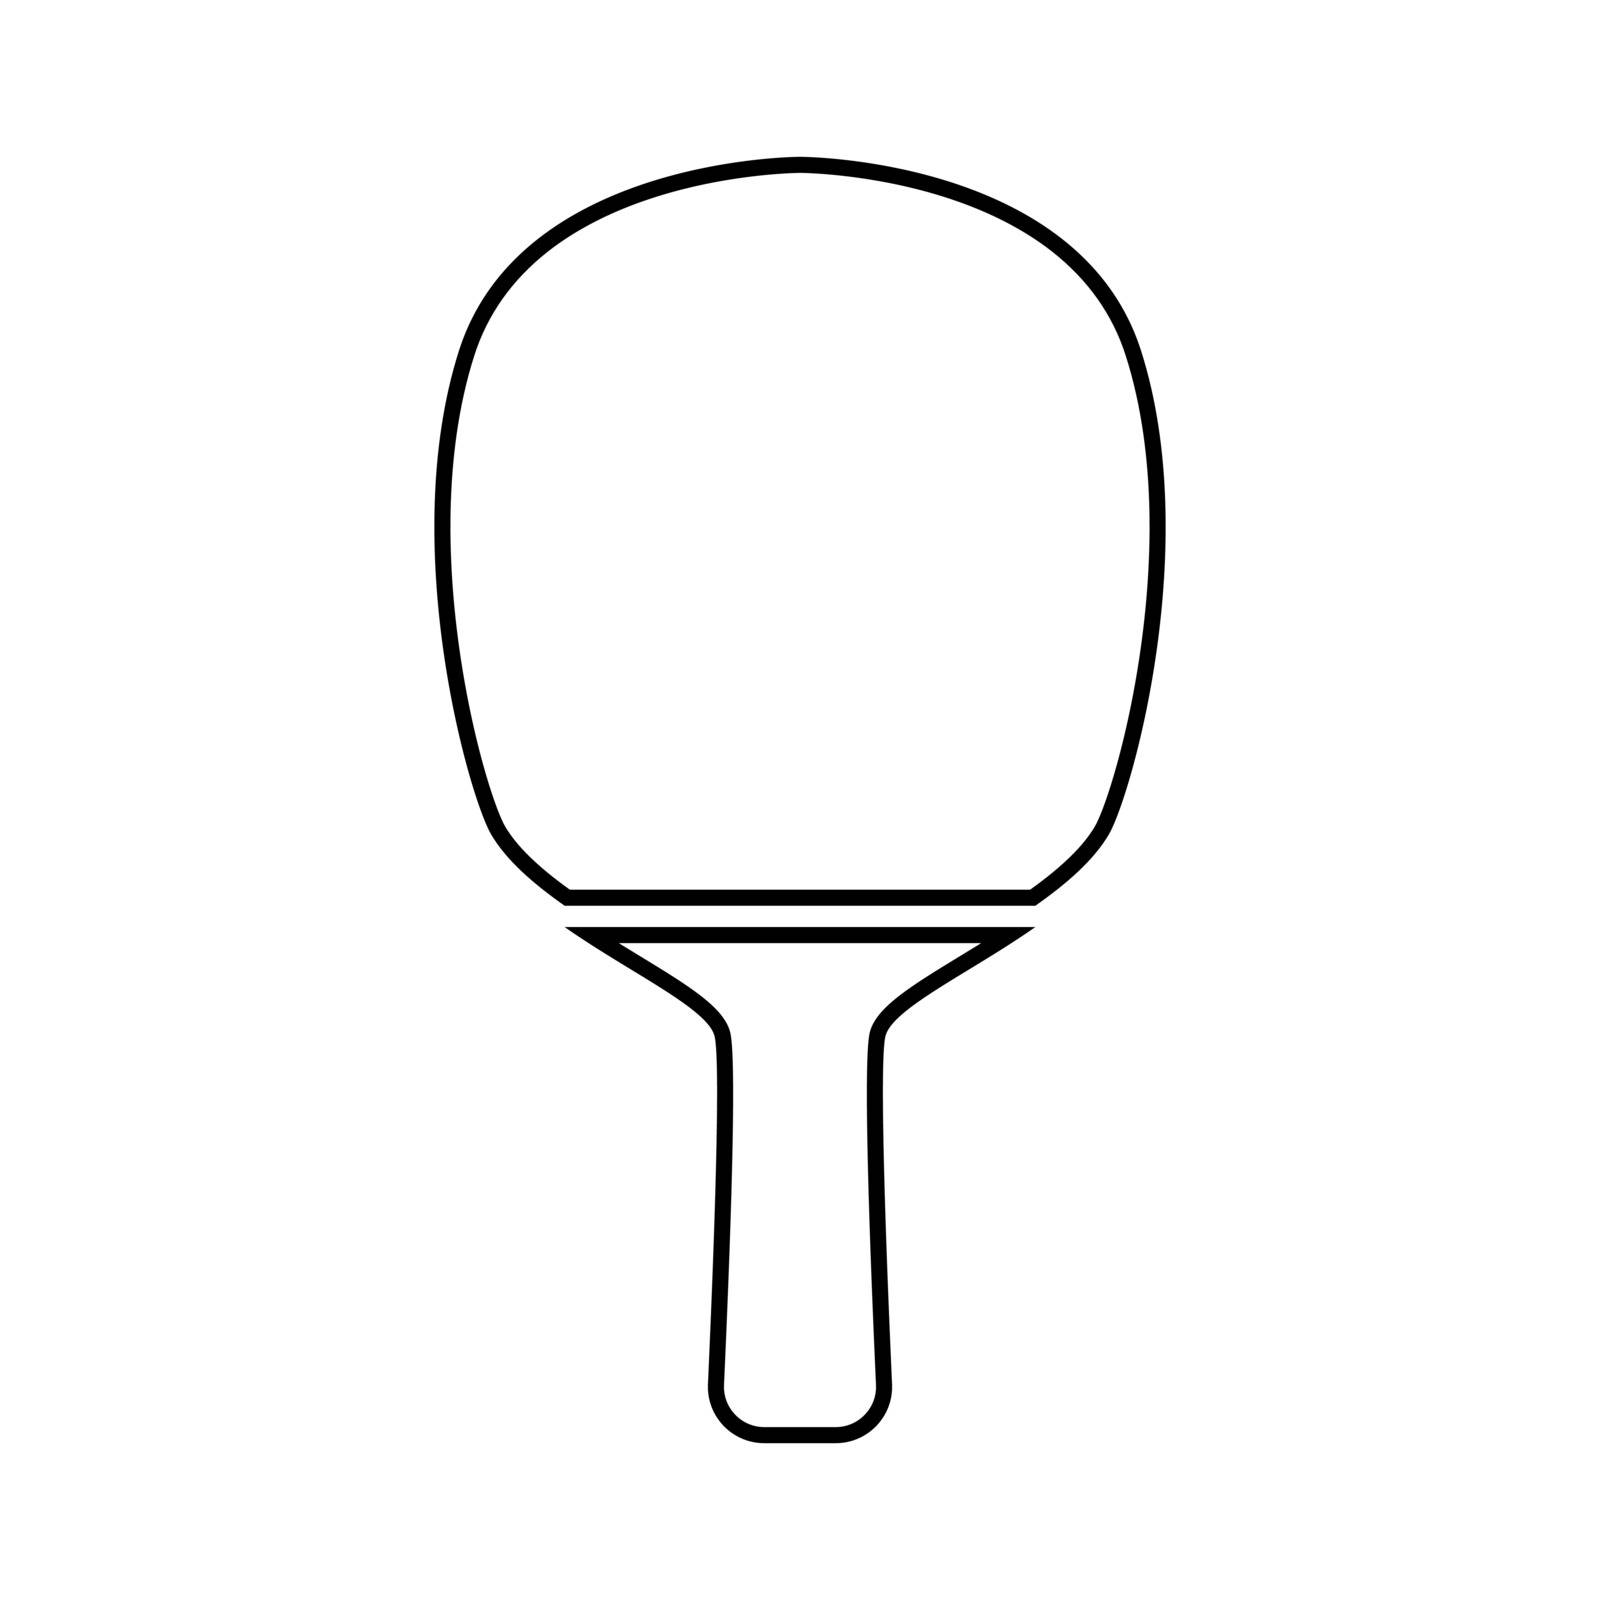 Rocket of a table tennis it is black icon . by serhii435